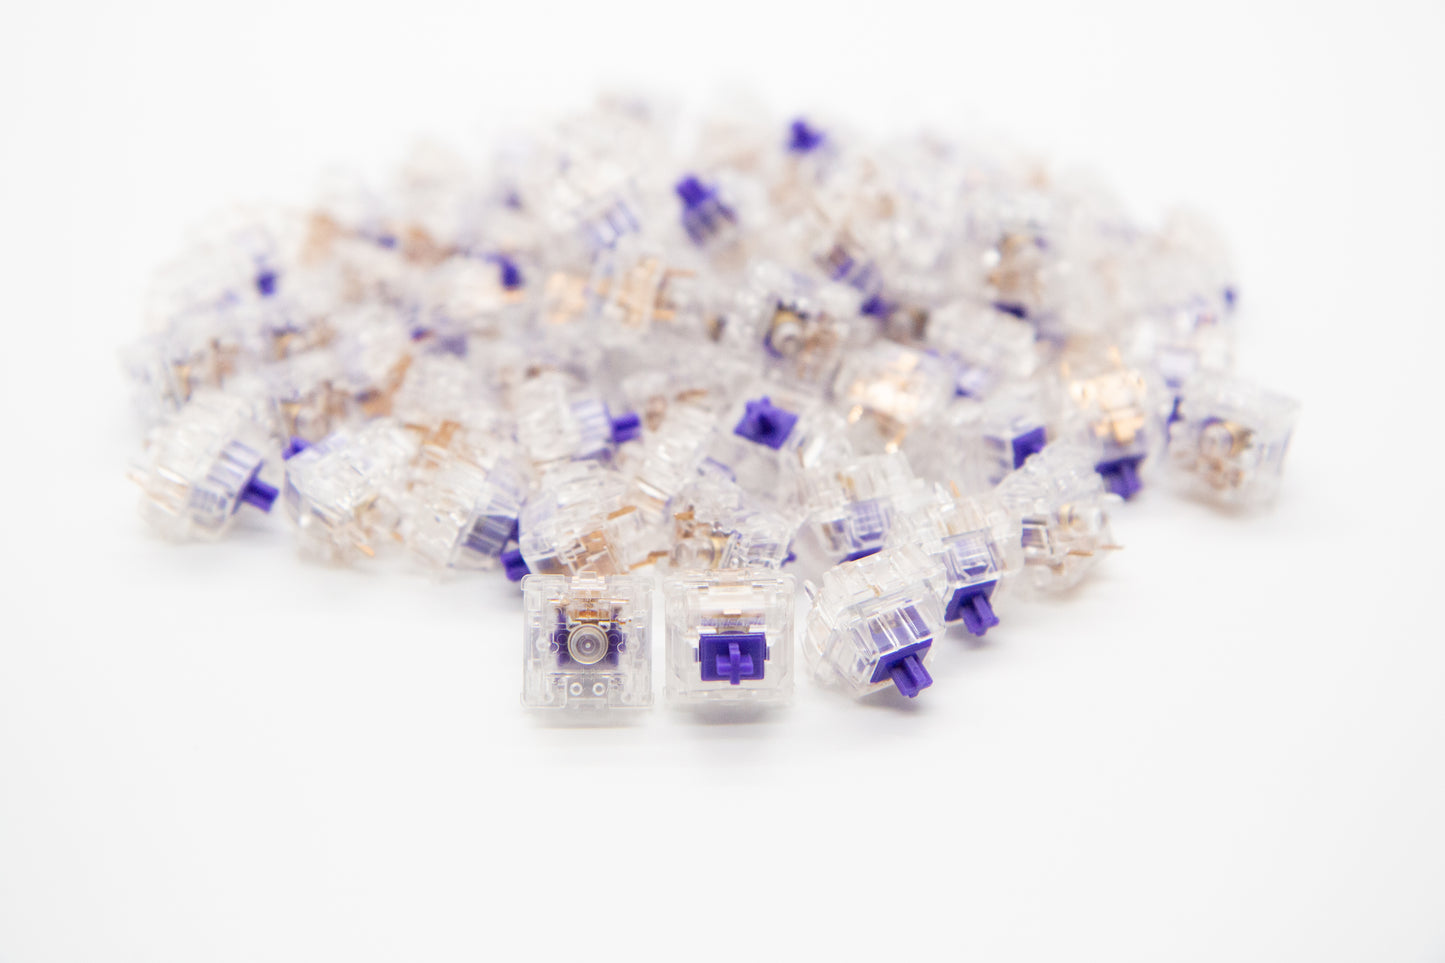 Close-up shot of a pile of ZealPC Zealios V2 - 65g mechanical keyboard switches featuring transparent housing and purple stems